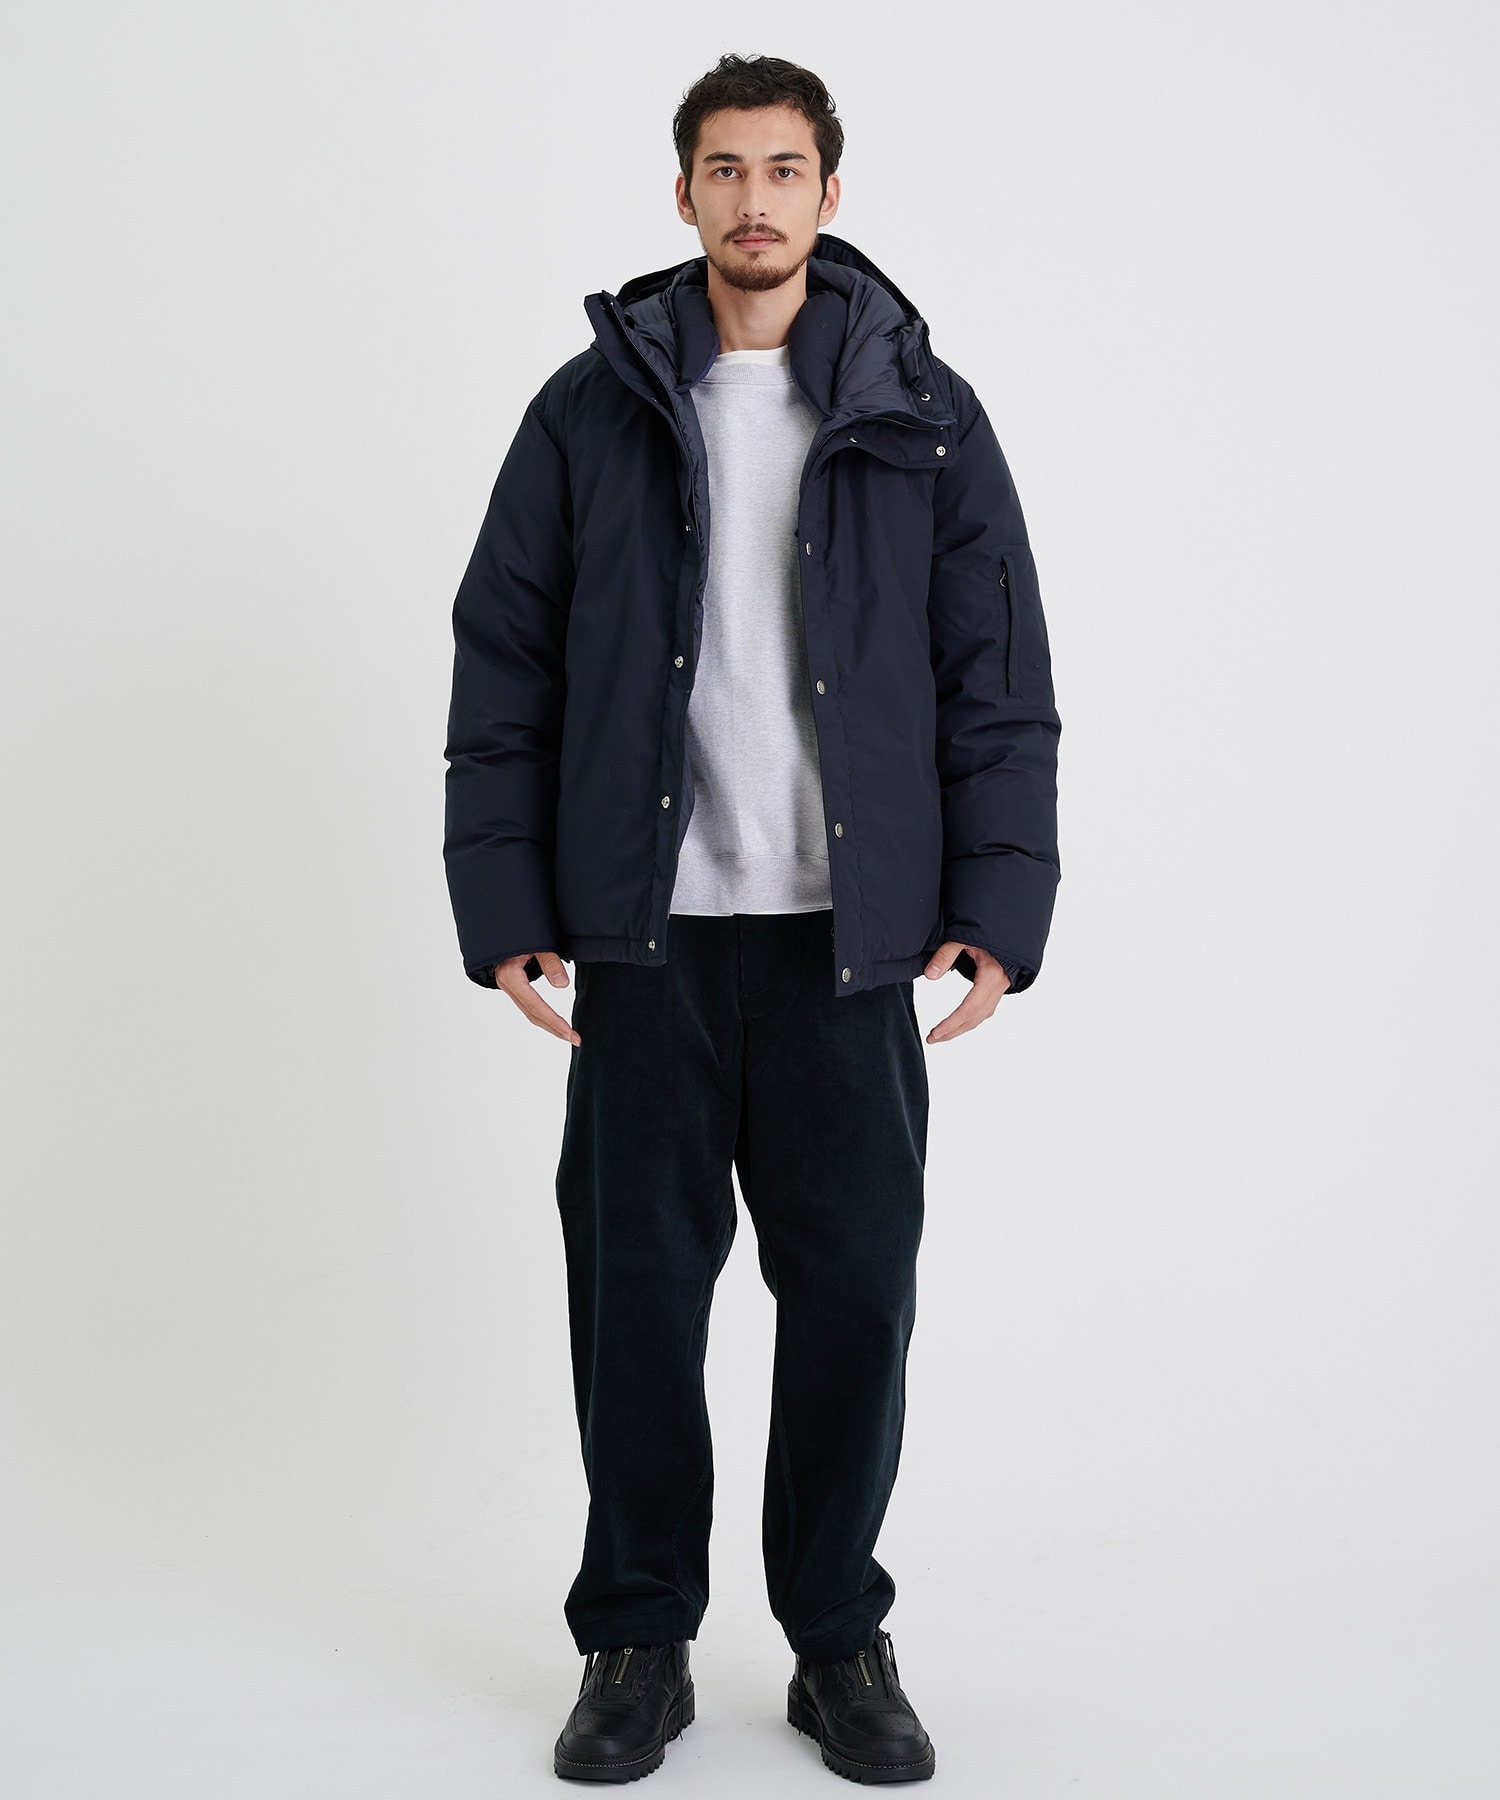 Corduroy Wide Tapered Field Pants THE NORTH FACE PURPLE LABEL